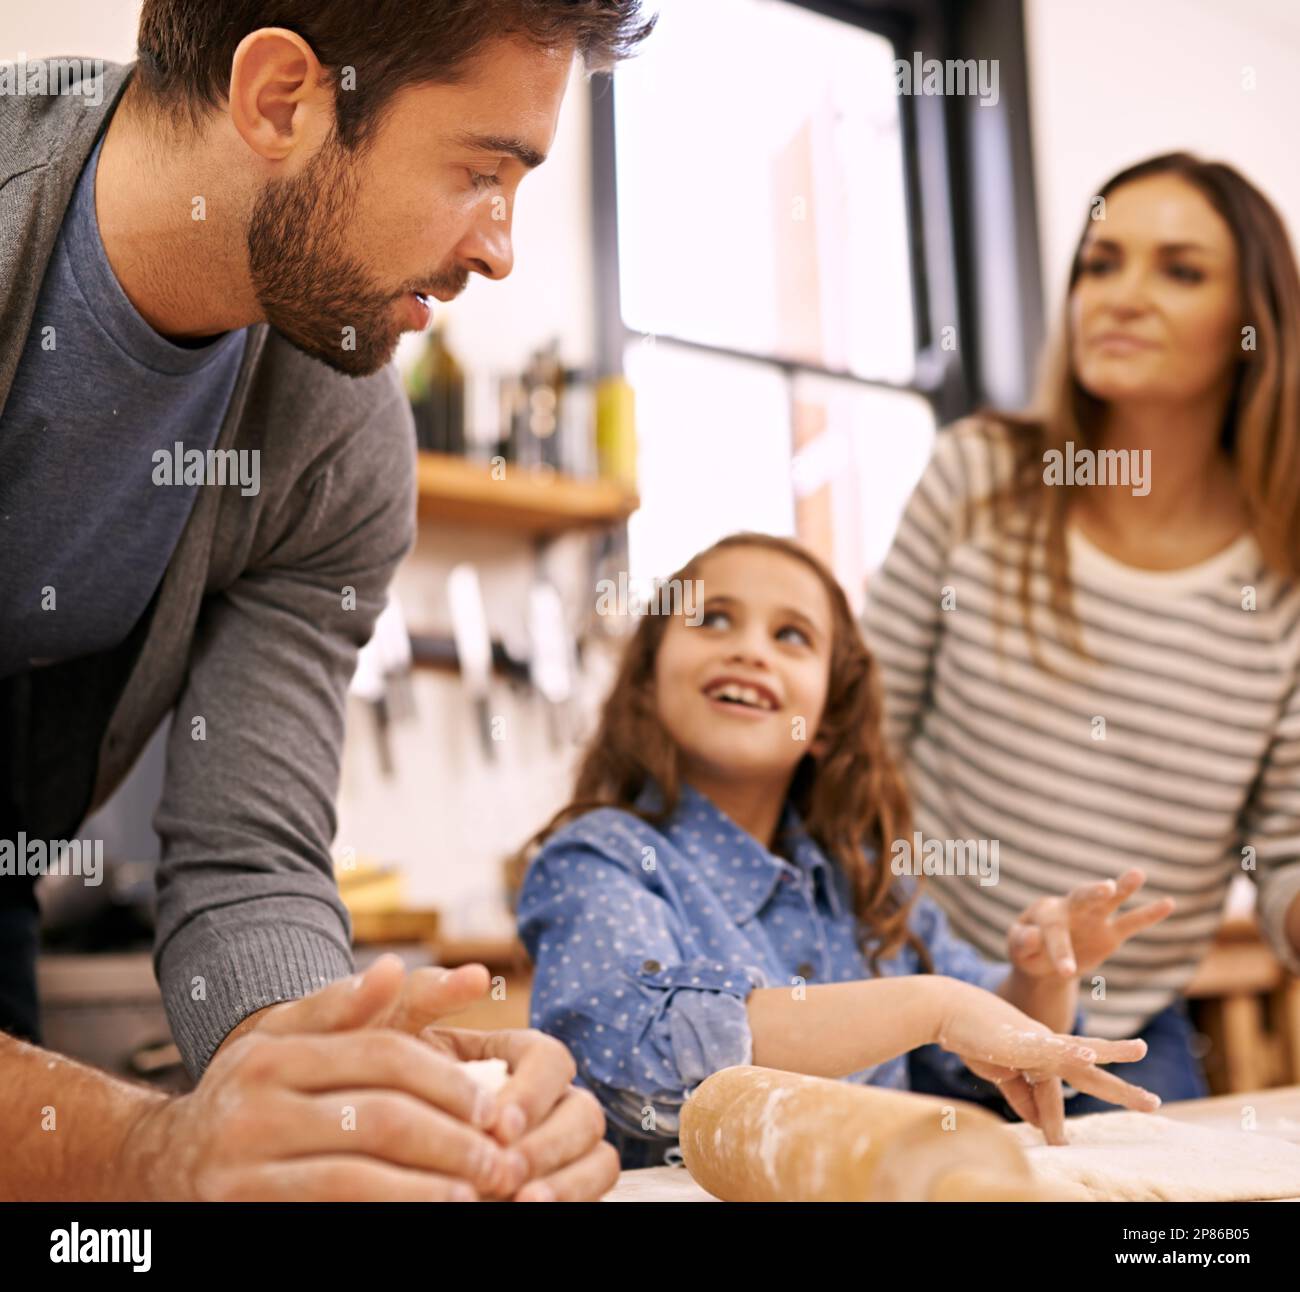 Am I doing ok dad. a happy family of three baking together in the kitchen. Stock Photo